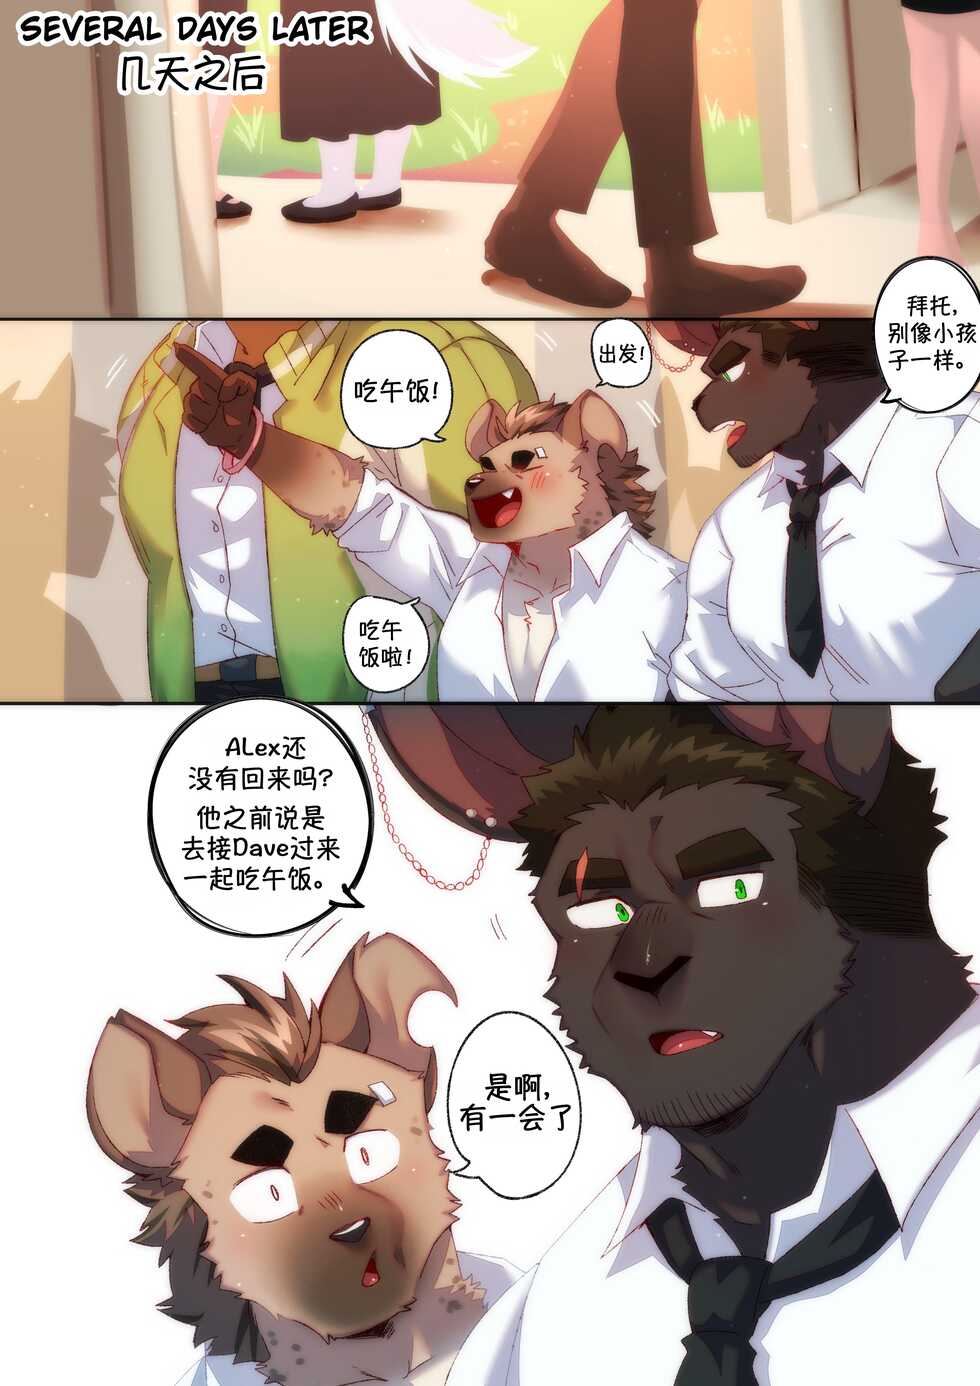 [BooBoo] Passionate Affection 深挚 [Chinese Ver.]  Ongoing - Page 1